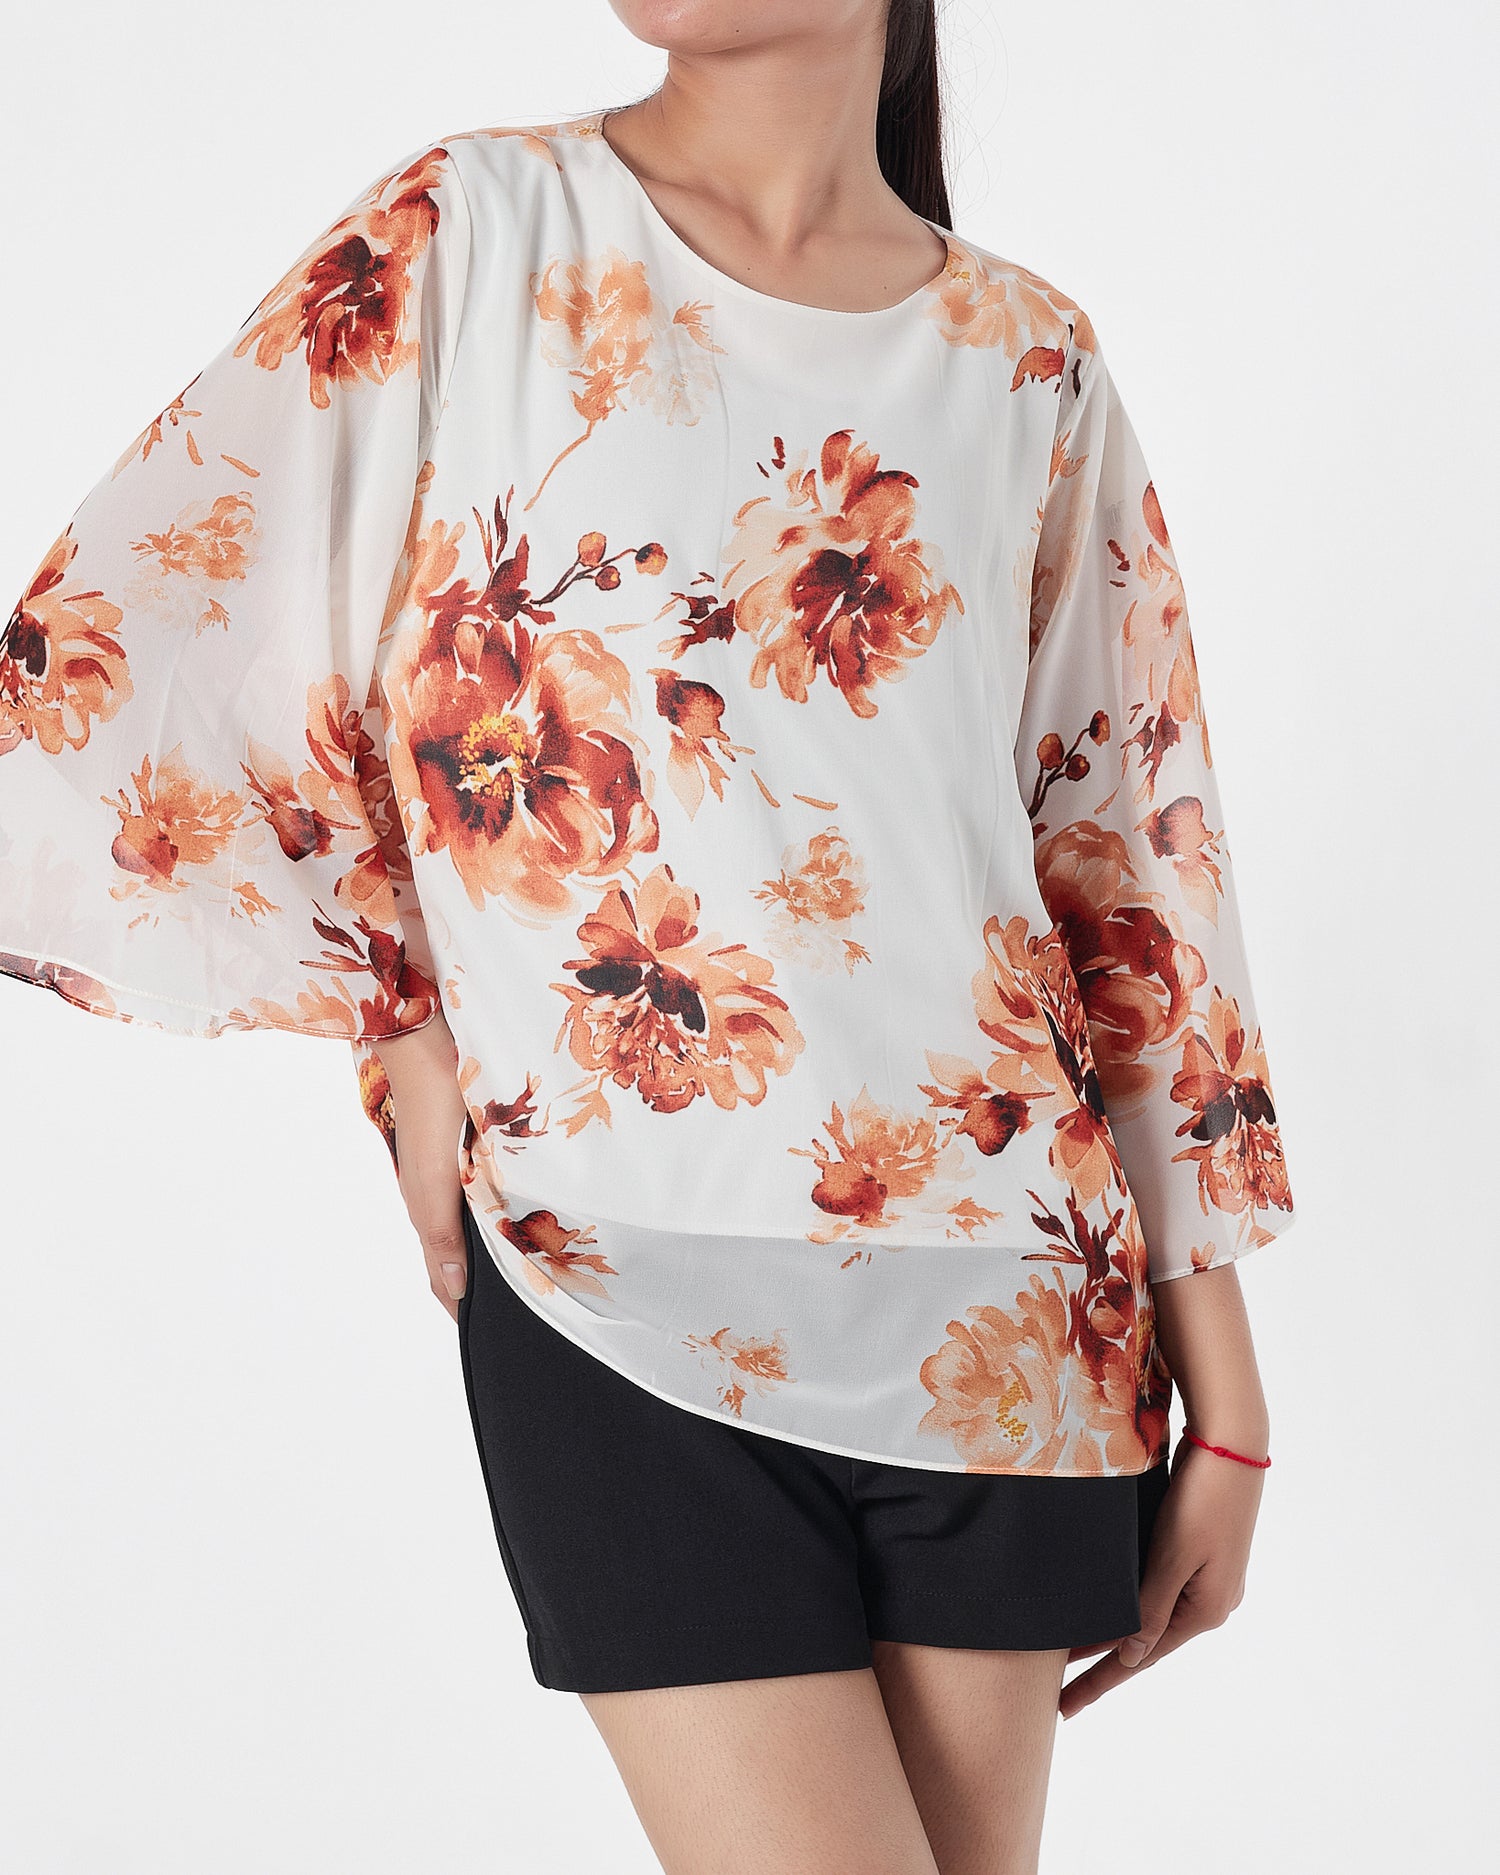 Floral Over Printed Lady  Shirts Long Sleeve 13.90